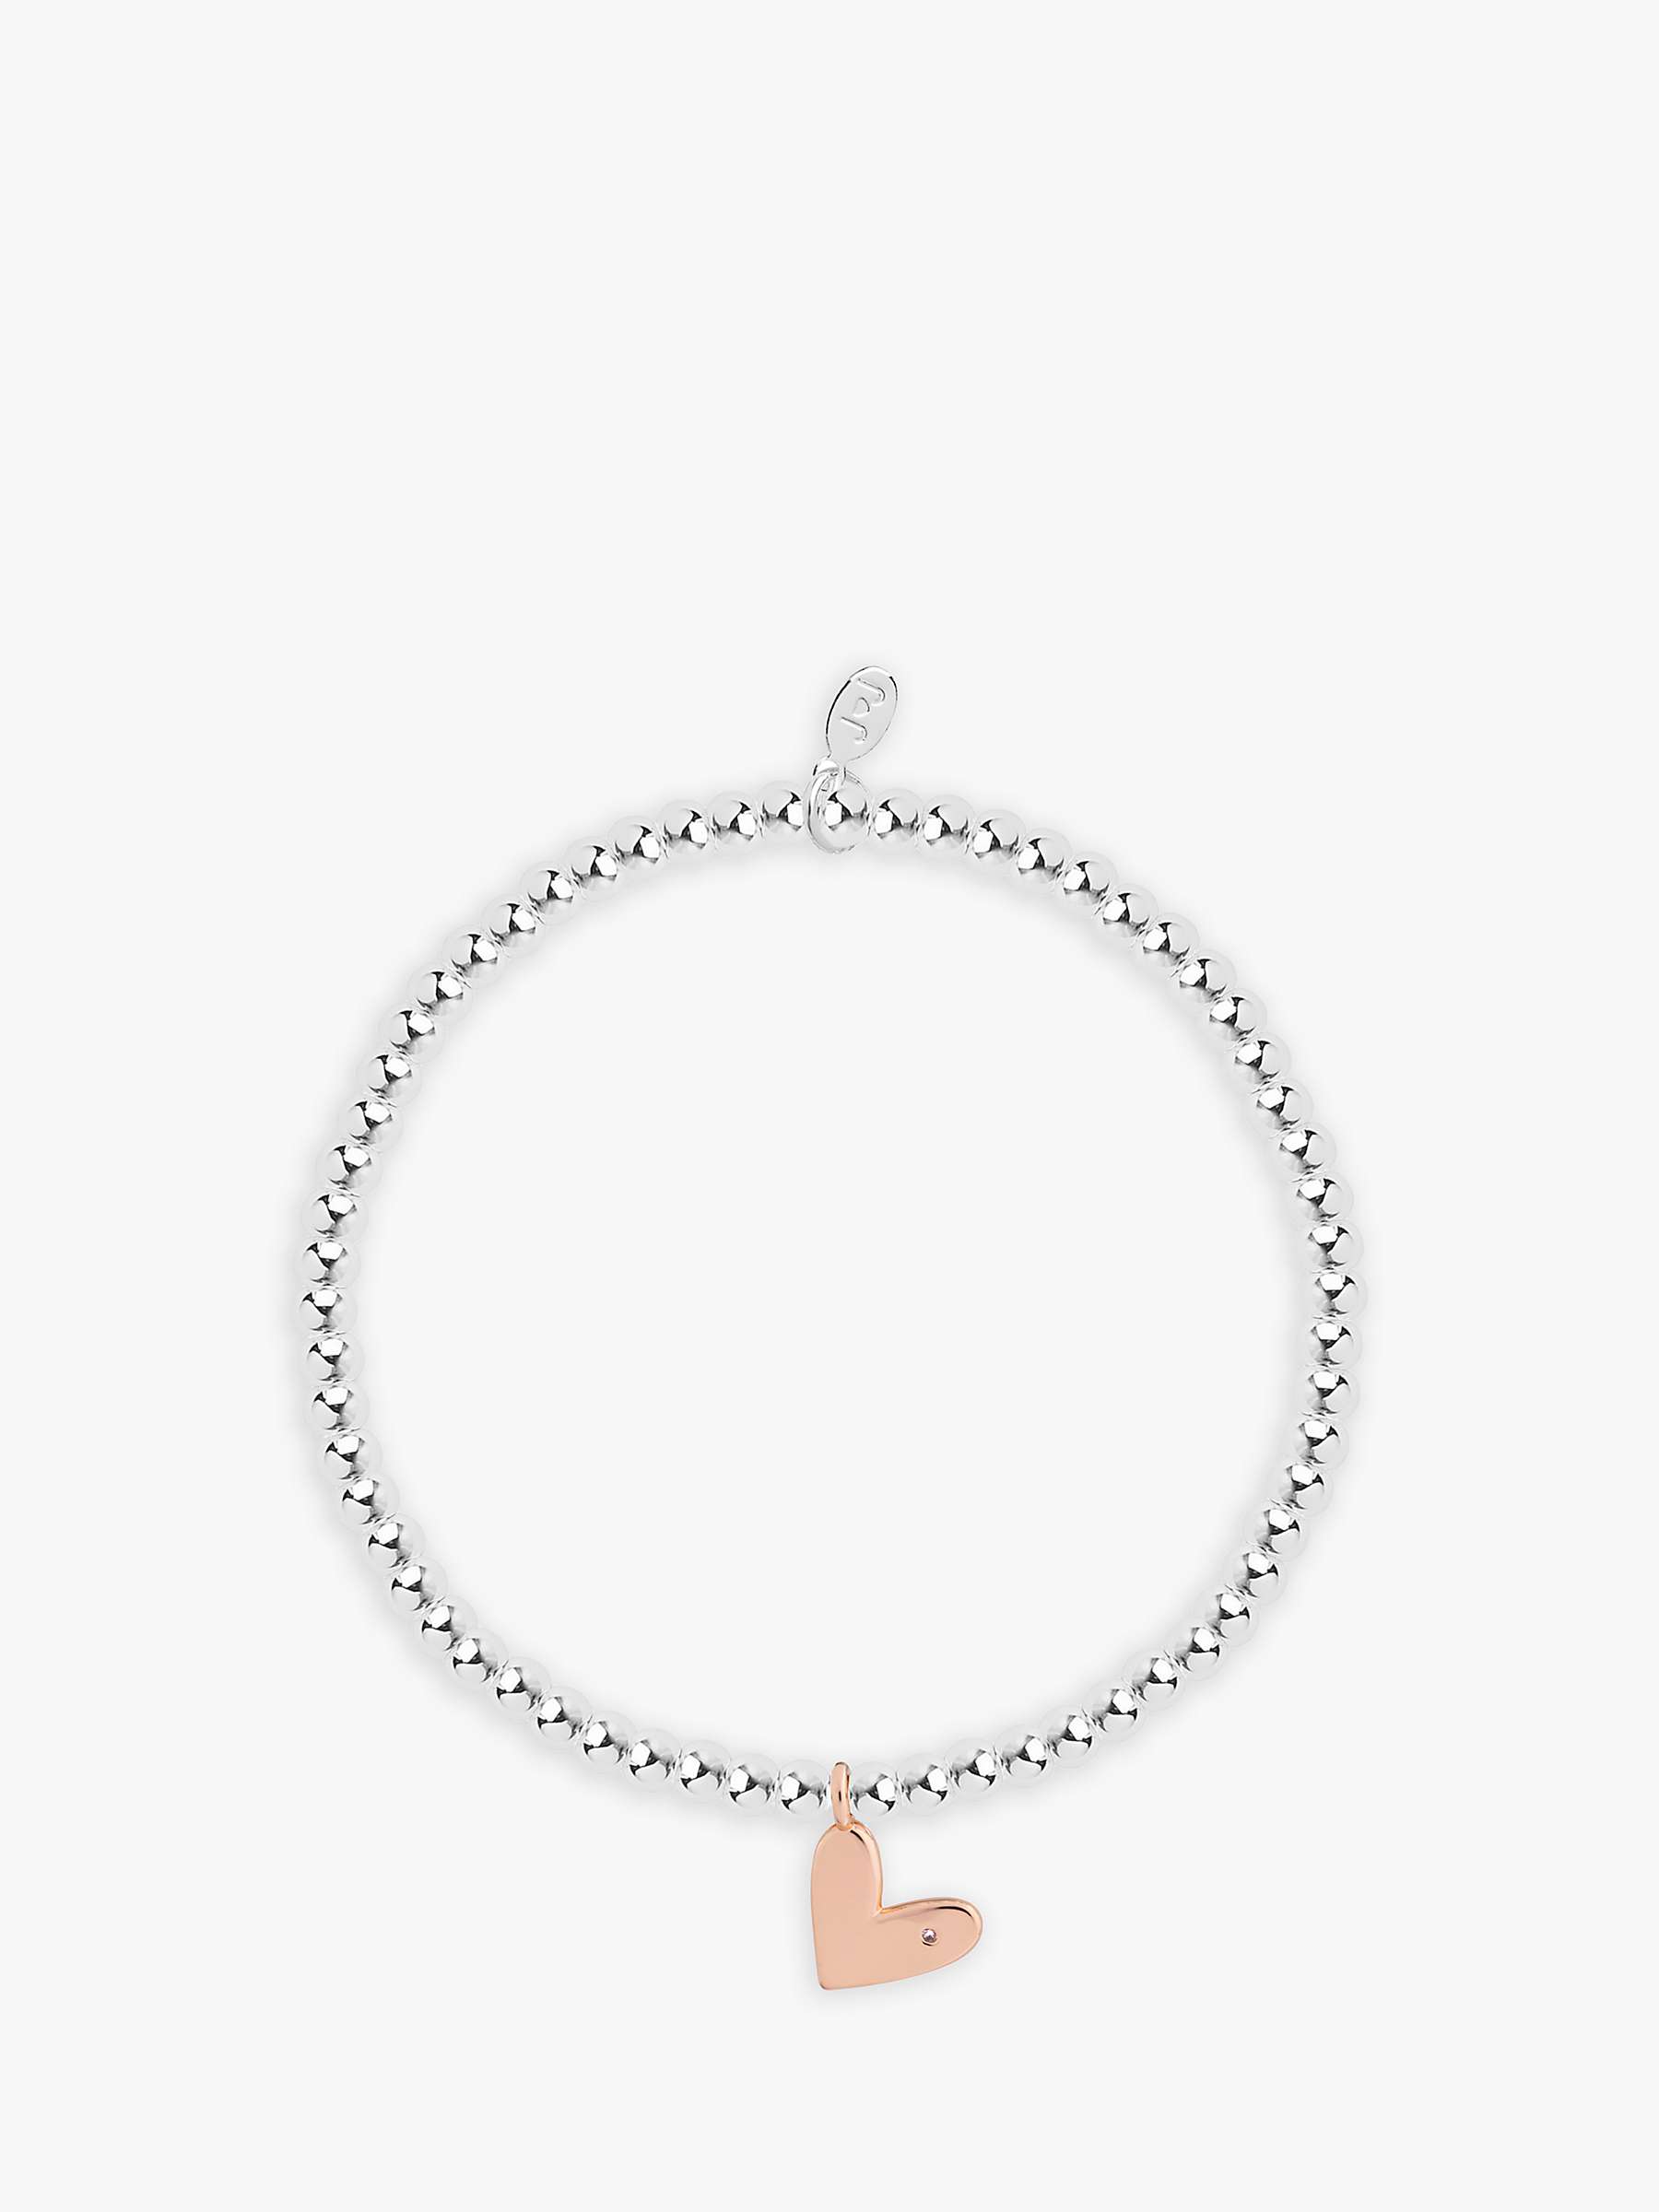 Buy Joma Jewellery A Little With Love Beaded Bracelet, Silver/Rose Gold Online at johnlewis.com